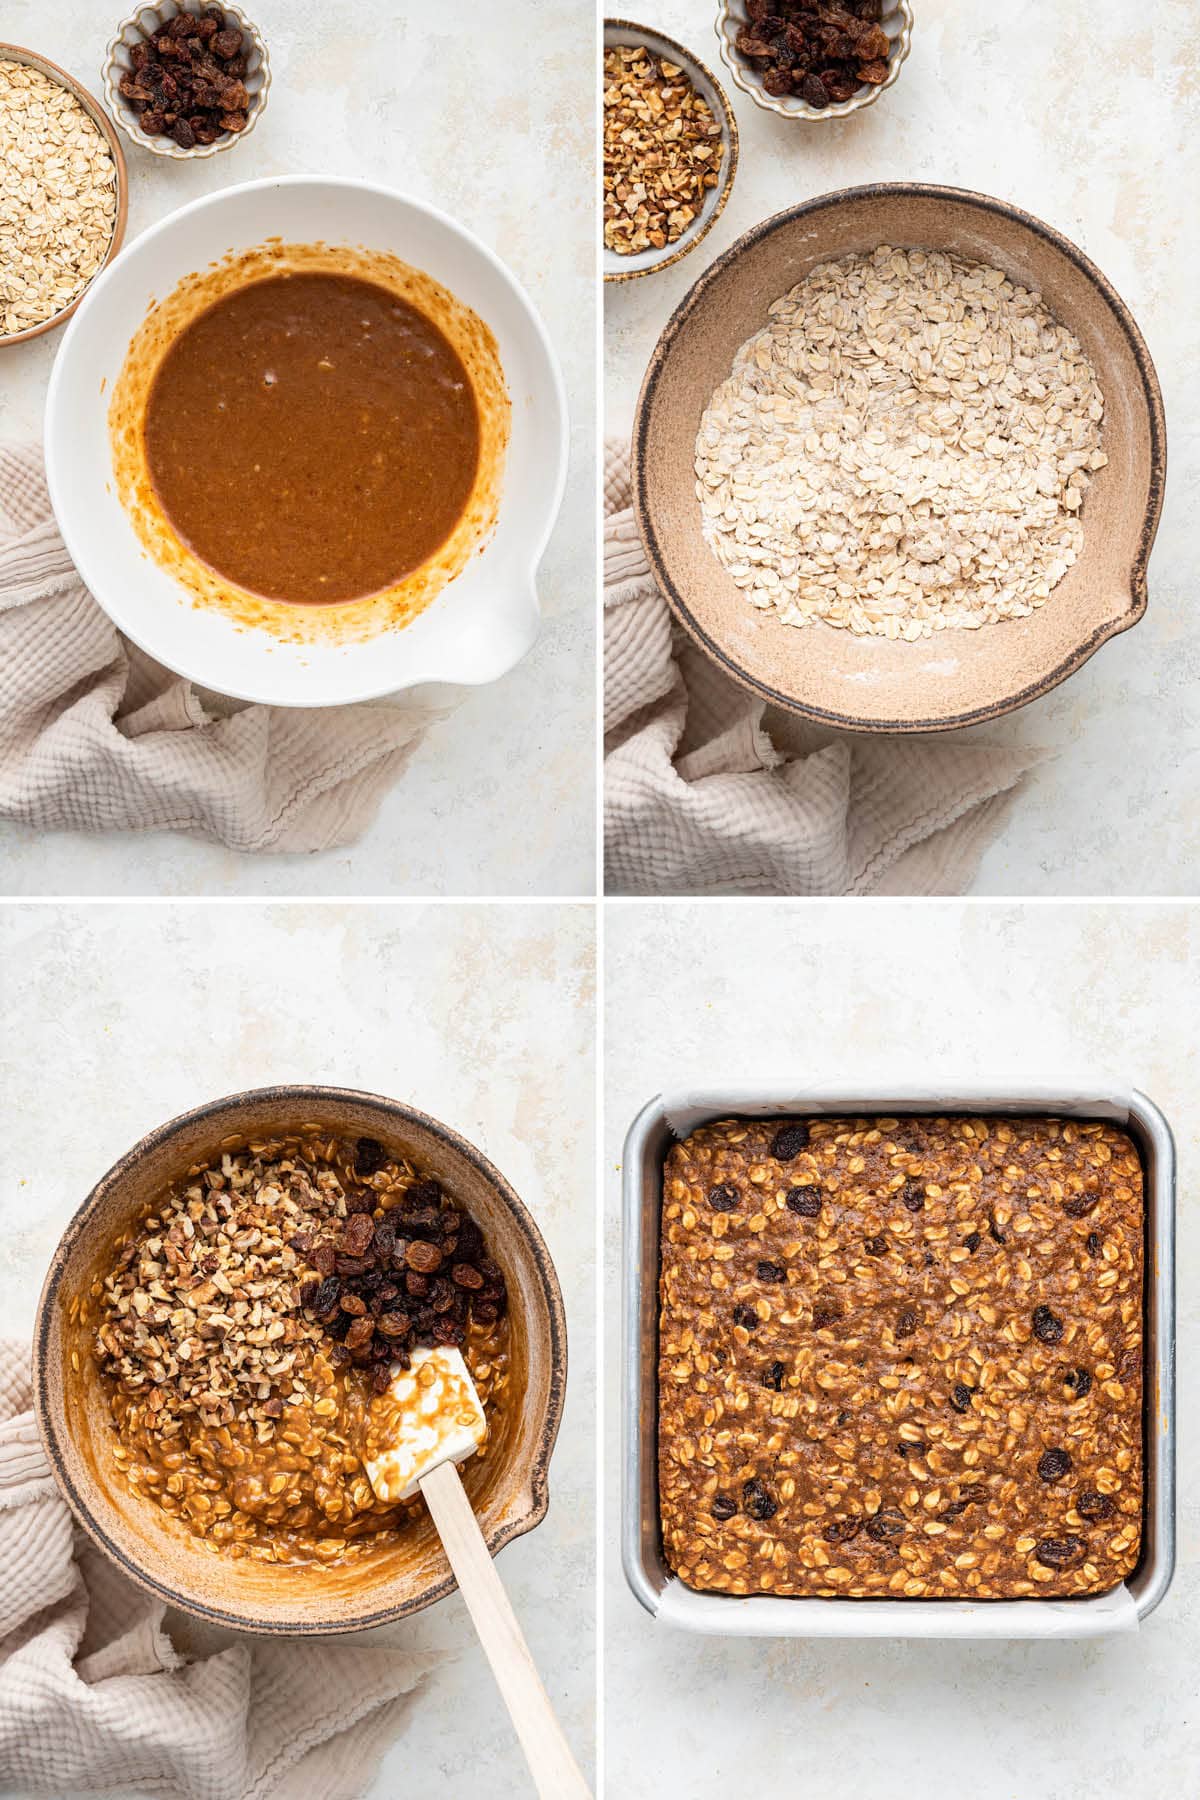 Collage of four photos showing how to make Healthy Banana Oat Bars: mixing batter and then baking the bars.